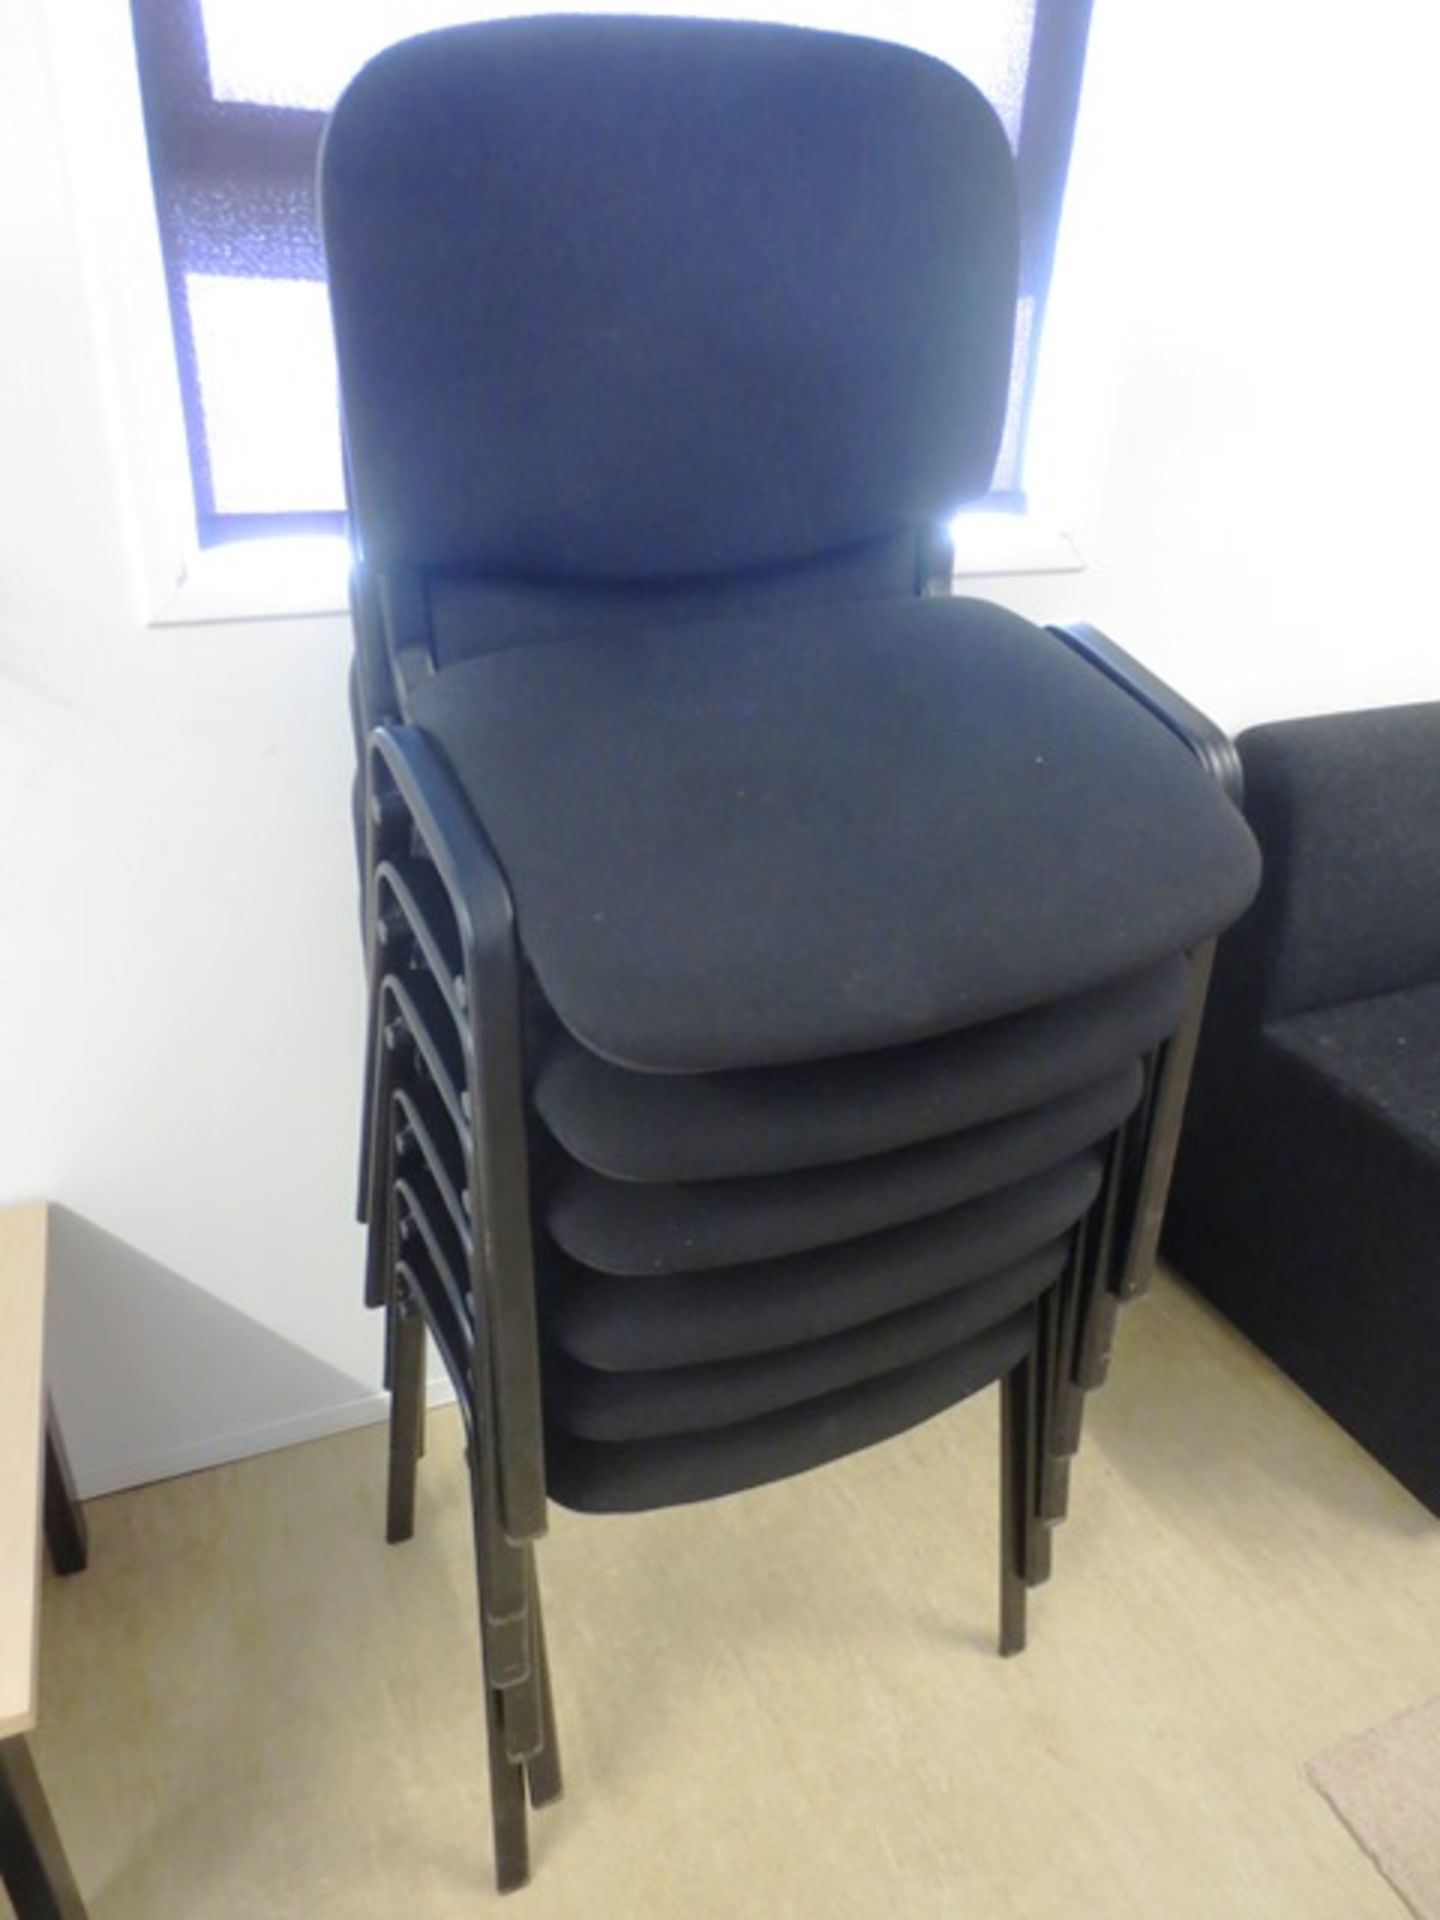 Six black cloth upholstered chairs